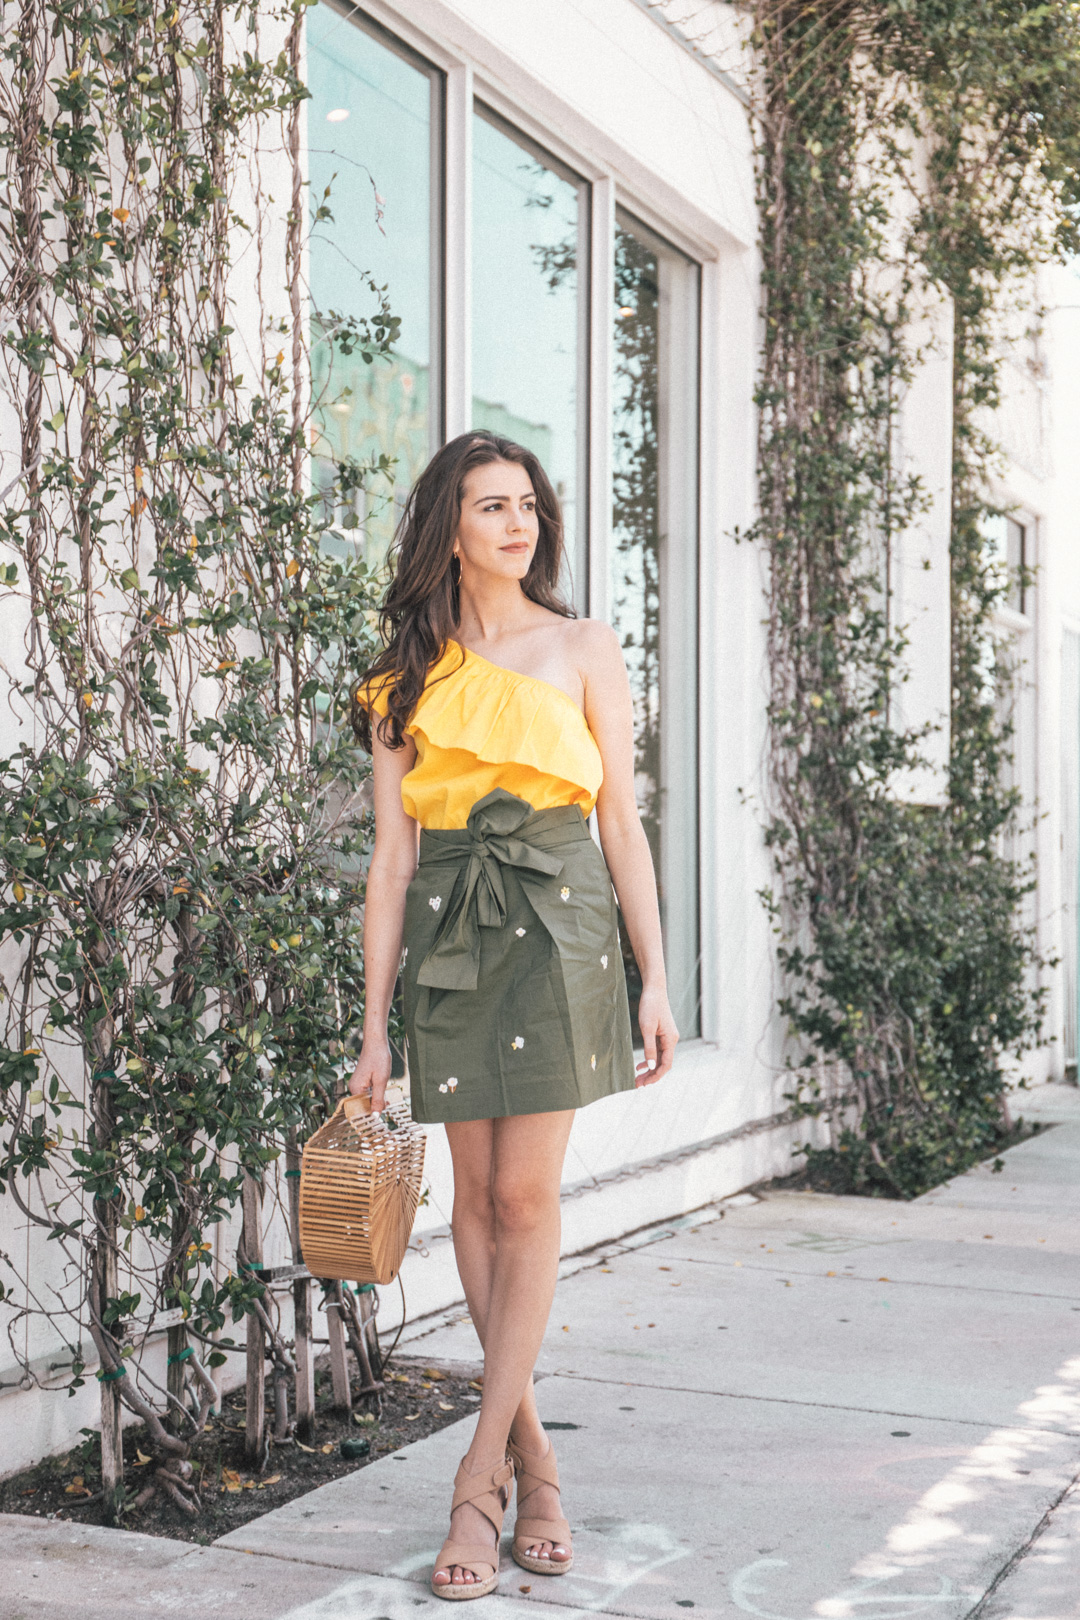 Jackie Roque styling a summer jcrew outfit in Miami.